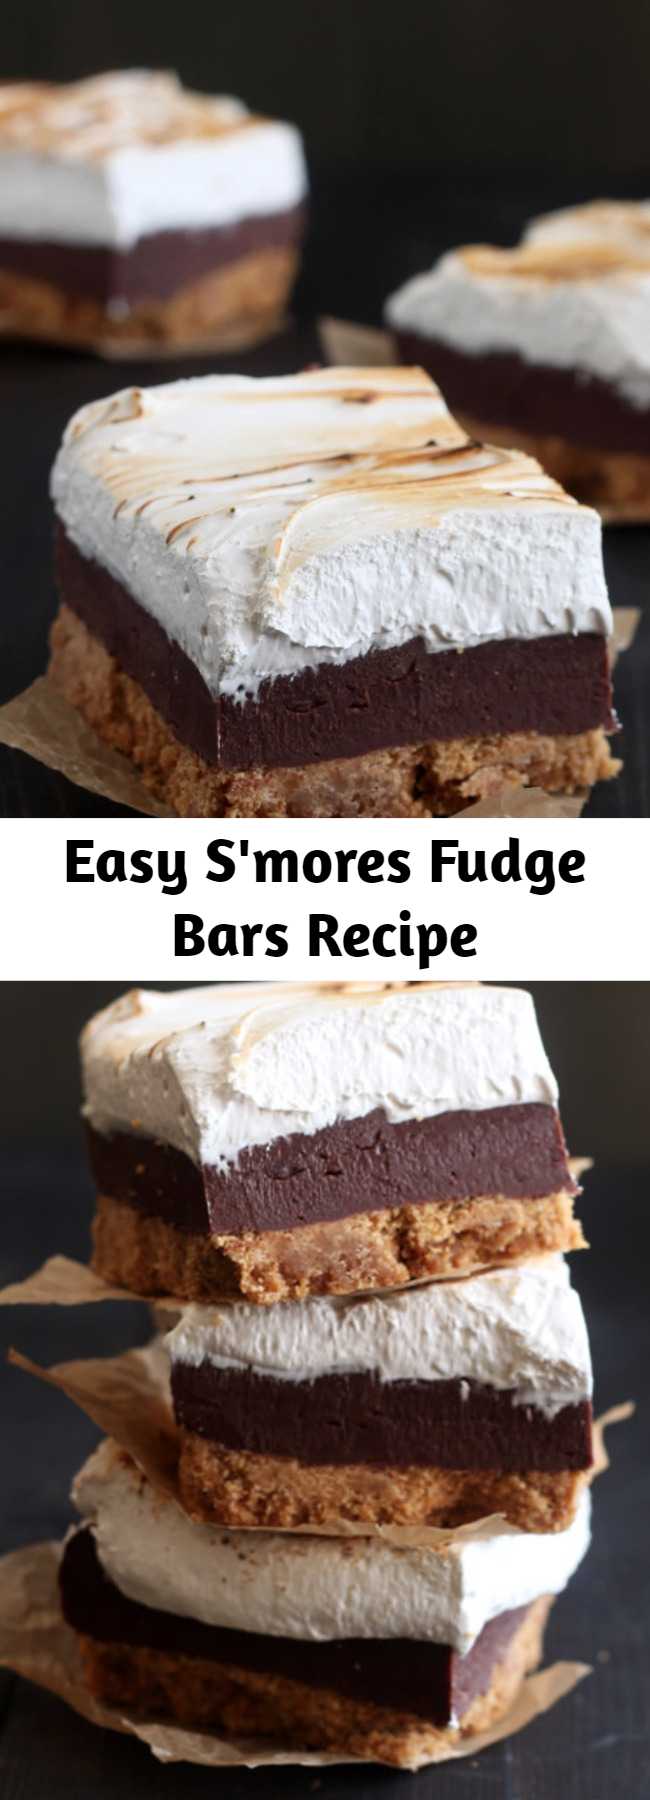 Easy S'mores Fudge Bars Recipe - S'mores Fudge Bars have a thick layer of buttery graham cracker crust, fudgy chocolate filling, and a homemade toasted marshmallow topping. Incredible! Perfect easy summer dessert recipe!